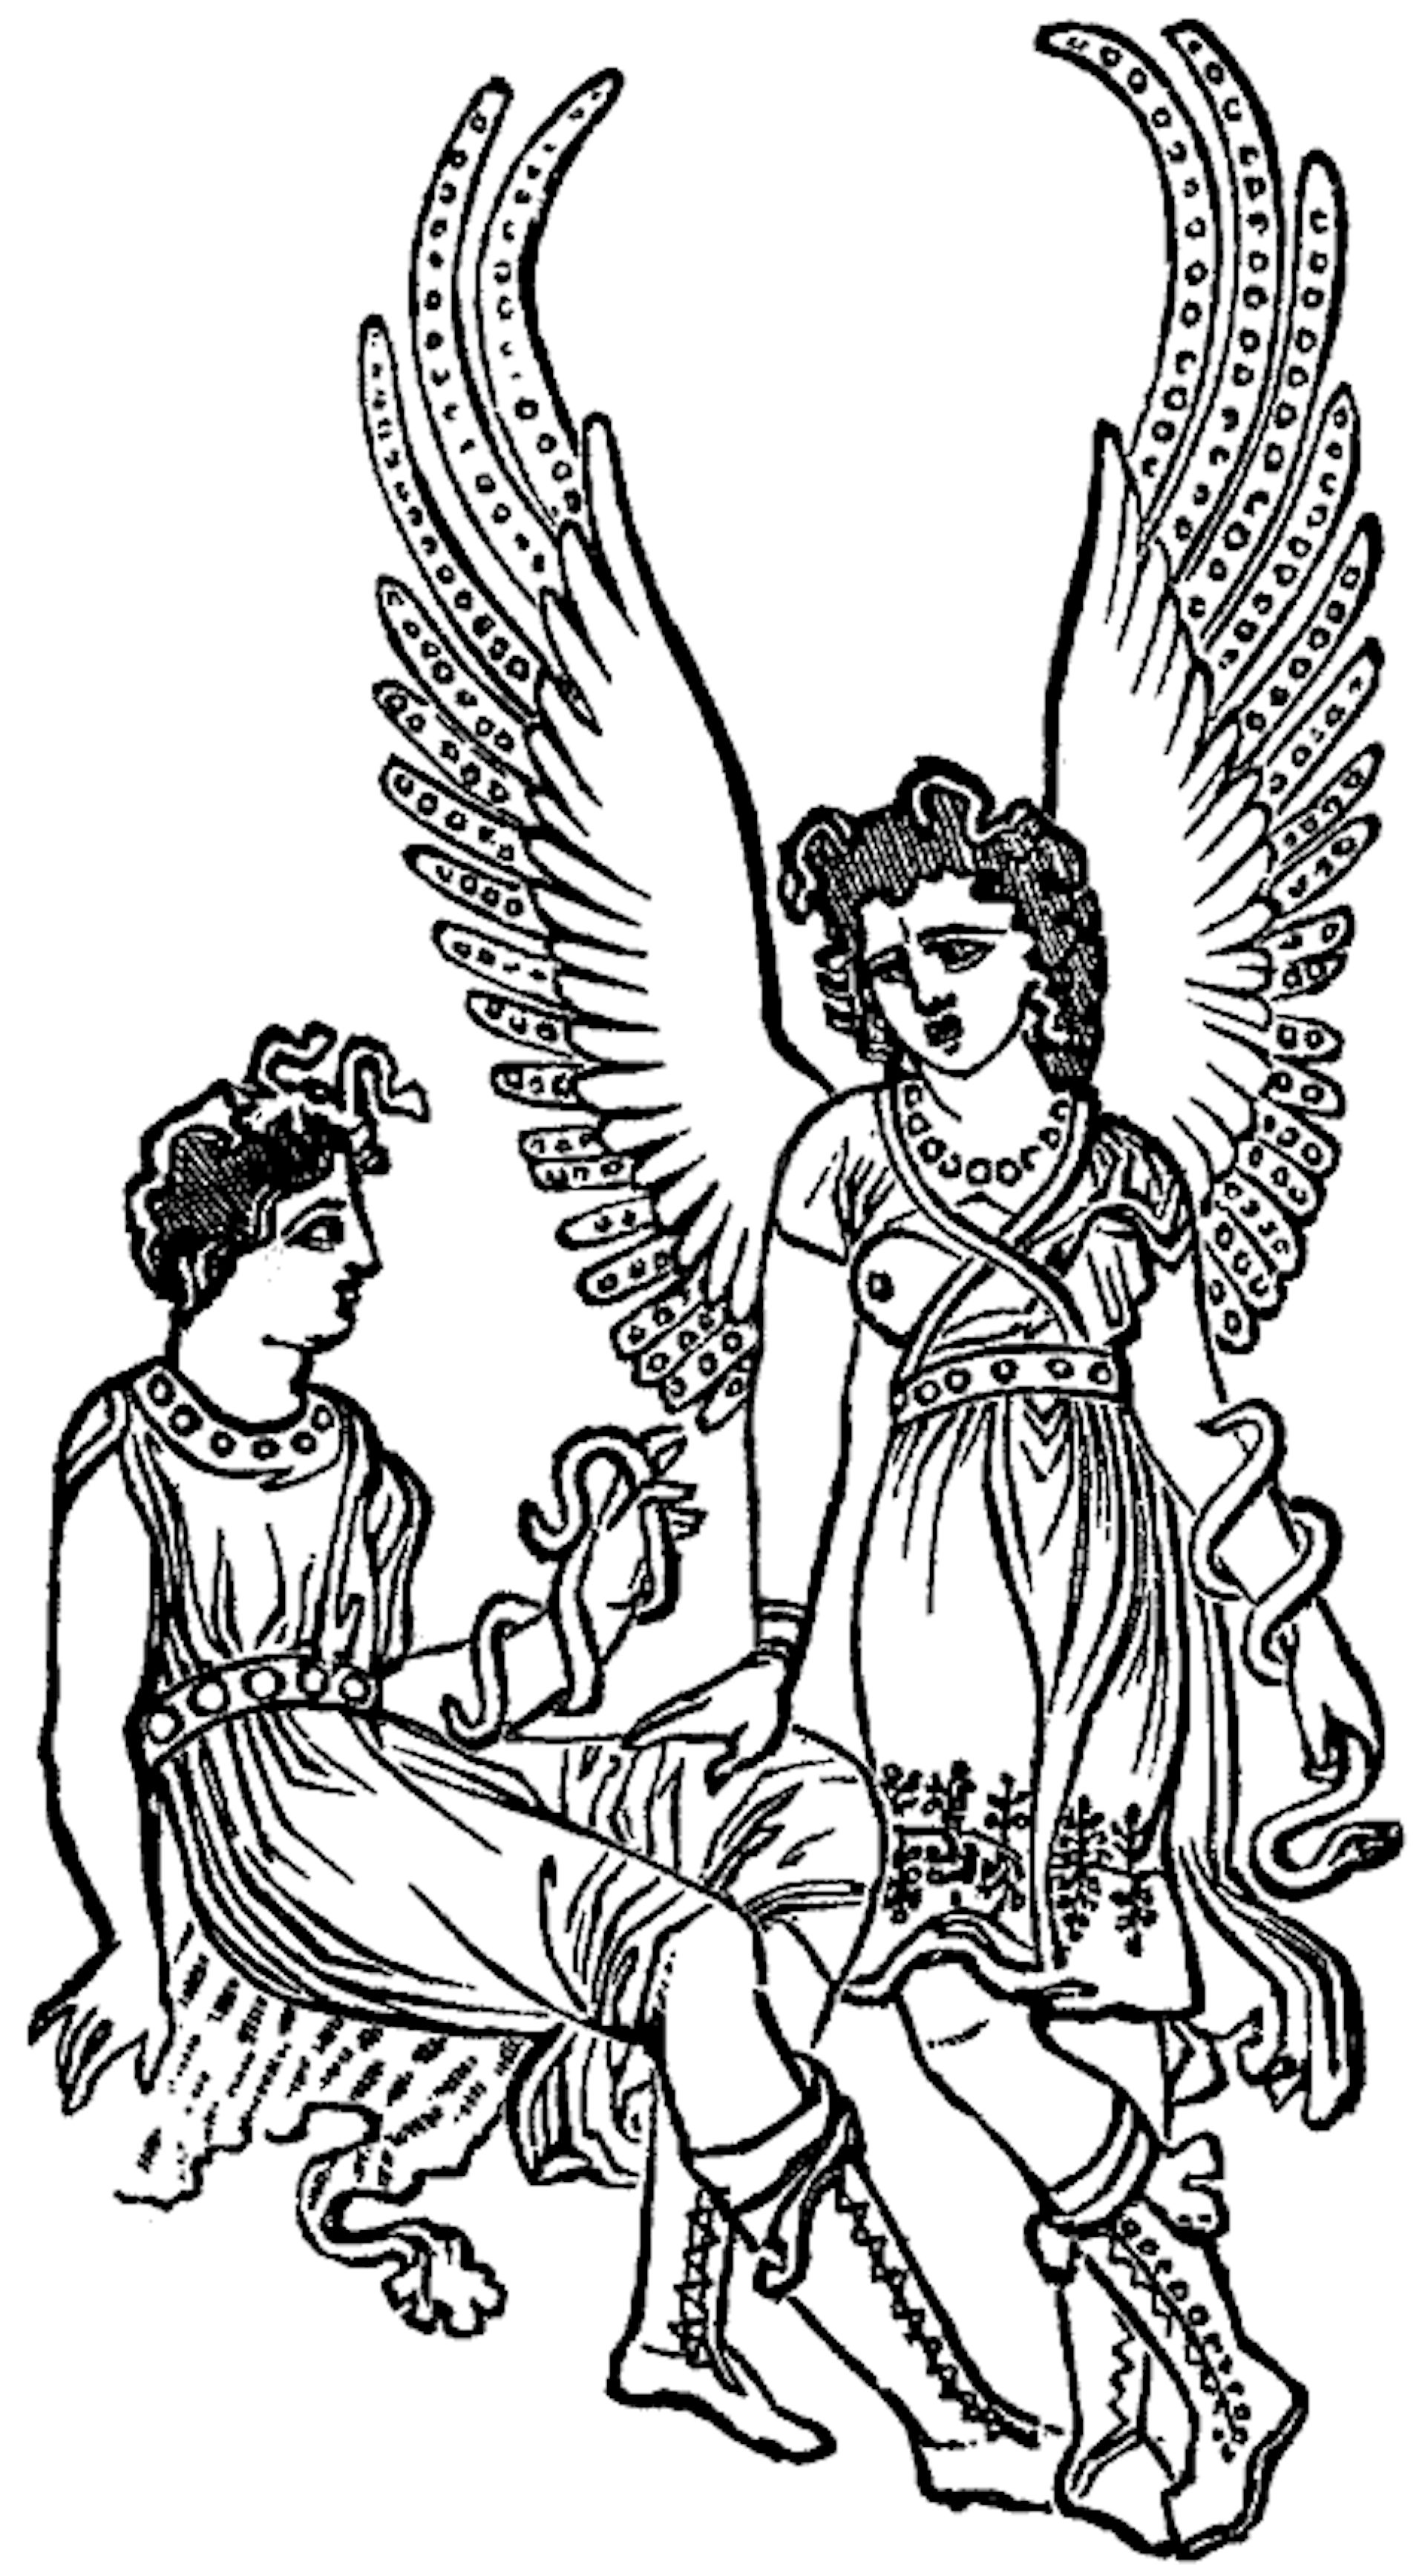 19th century illustration of two Erinyes, after 4th century BCE Apulian vase painting.